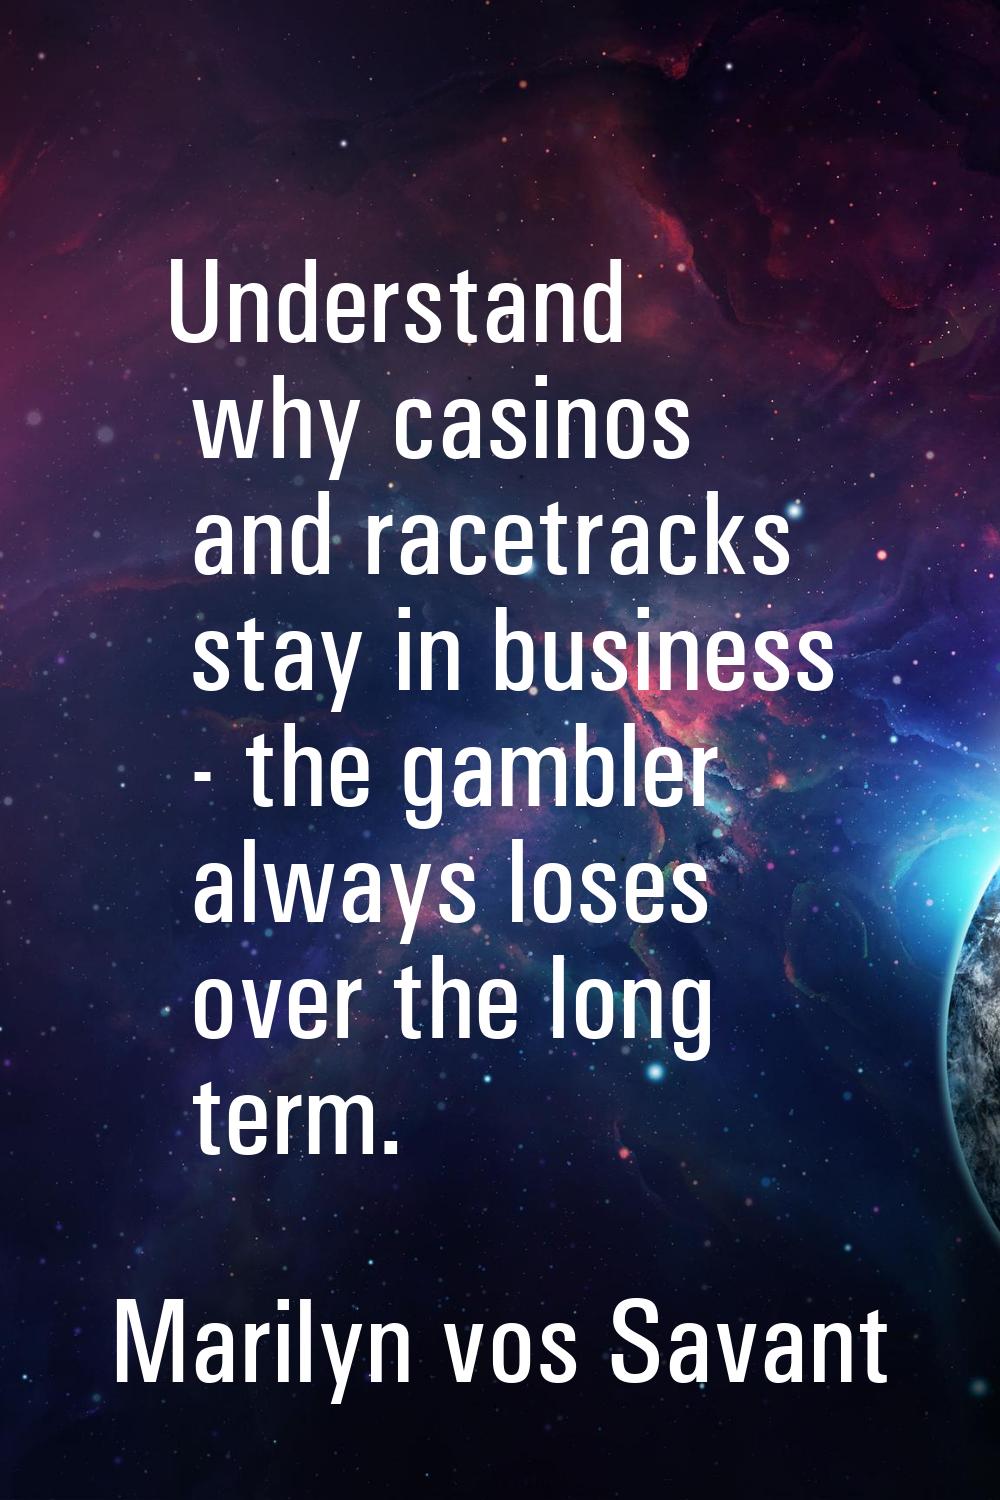 Understand why casinos and racetracks stay in business - the gambler always loses over the long ter